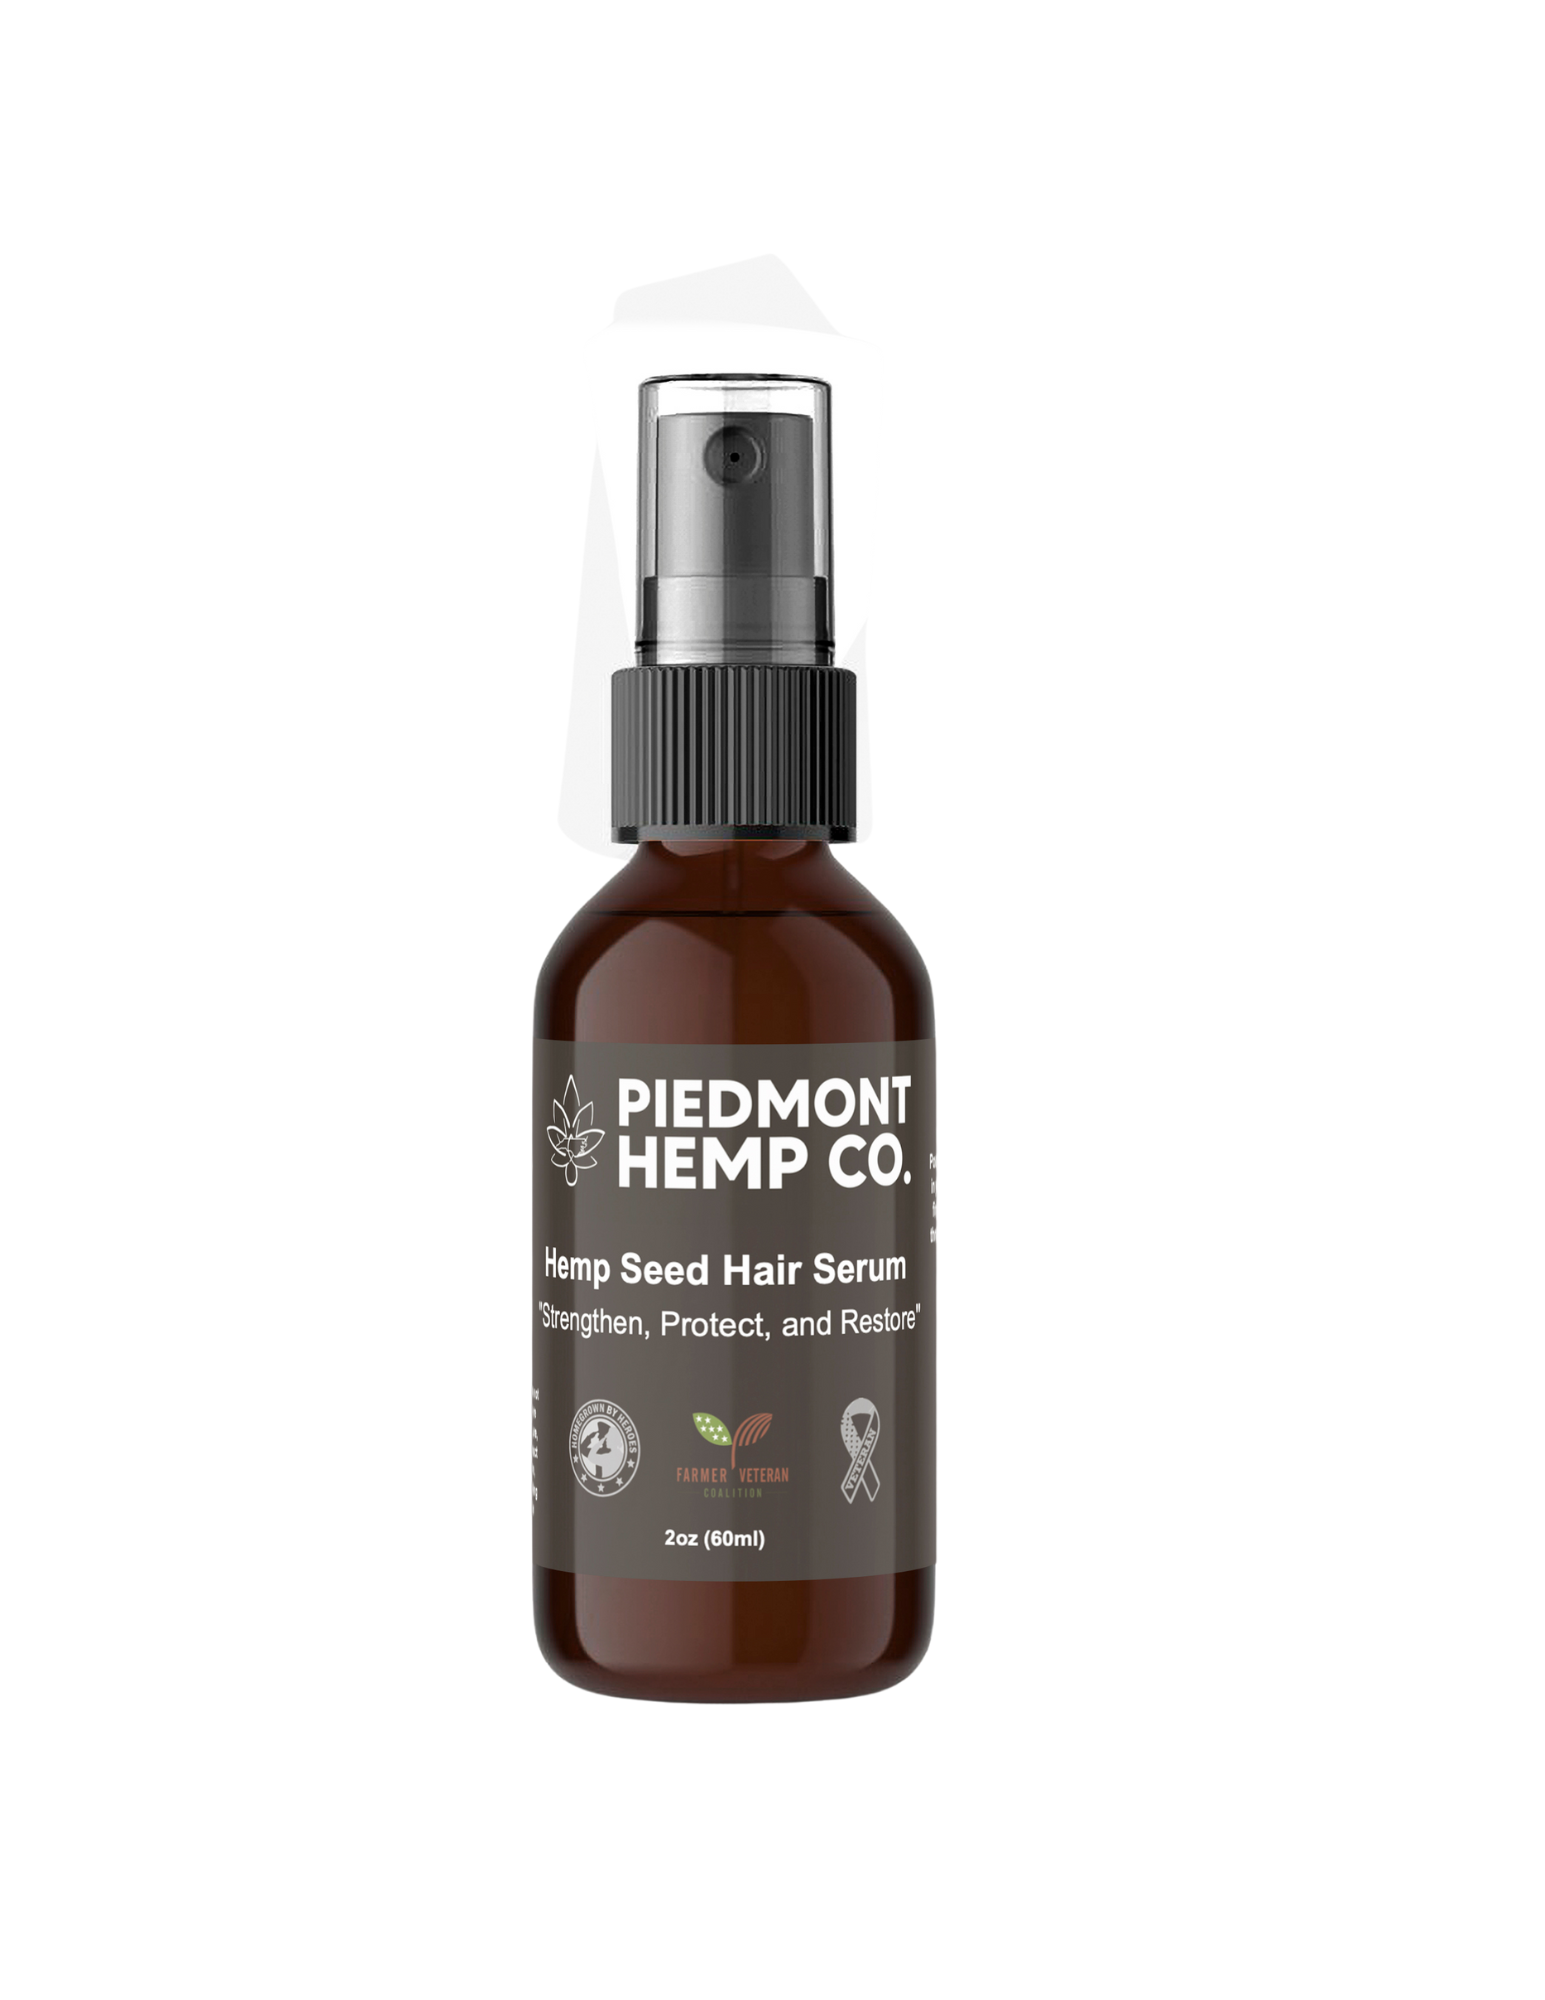 We introduce our Luxurious and Hydrating Hair Serum made with high-quality essential organic oils. Our Hemp Hydrating Hair Serum is a multi-moisture mix of relaxing Hemp Seed, Coconut, Jojoba, and Patchouli Oils to Strengthen, Restore, and Protect your hair and scalp, along with our unique Ginger Vanilla fragrance.<meta charset="UTF-8"><span data-mce-fragment="1"> </span>